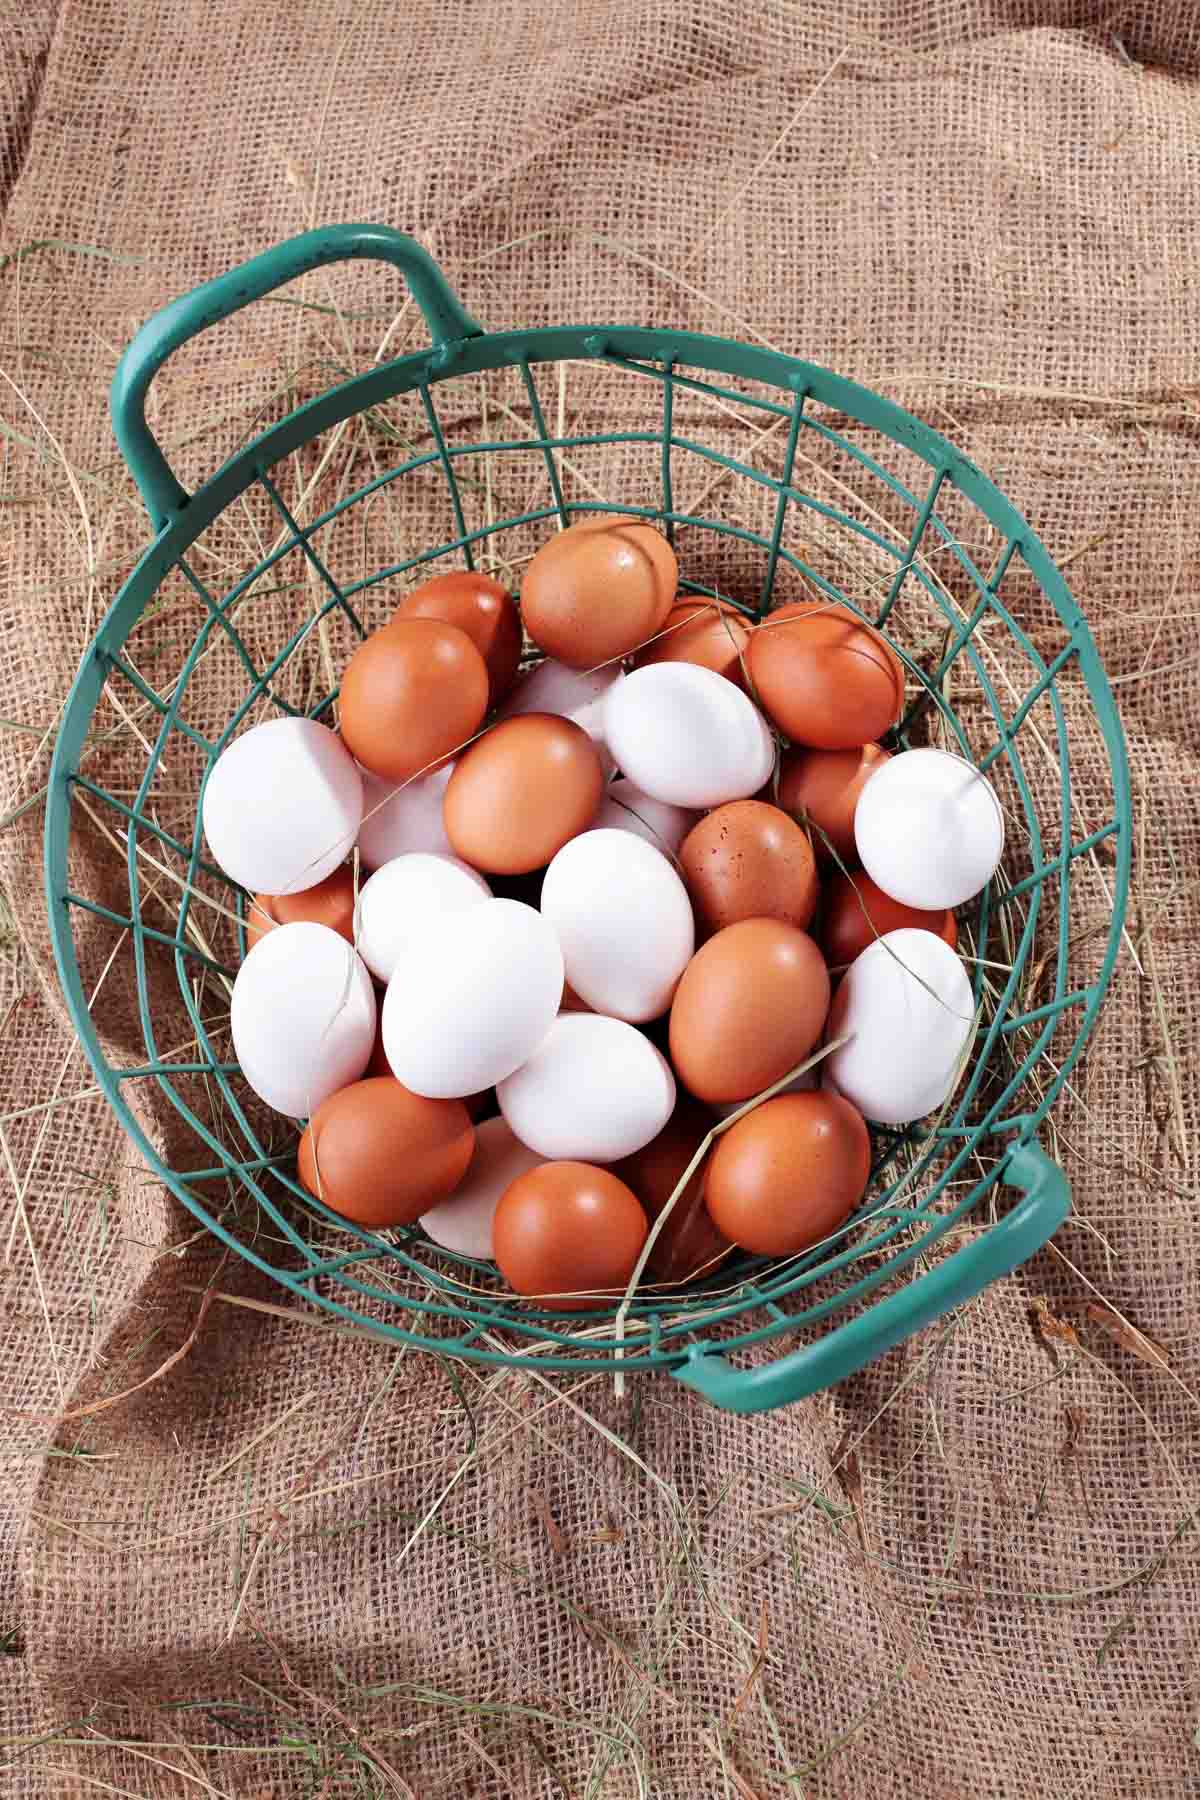 Farm fresh white and brown eggs in a basket on a burlap sack.